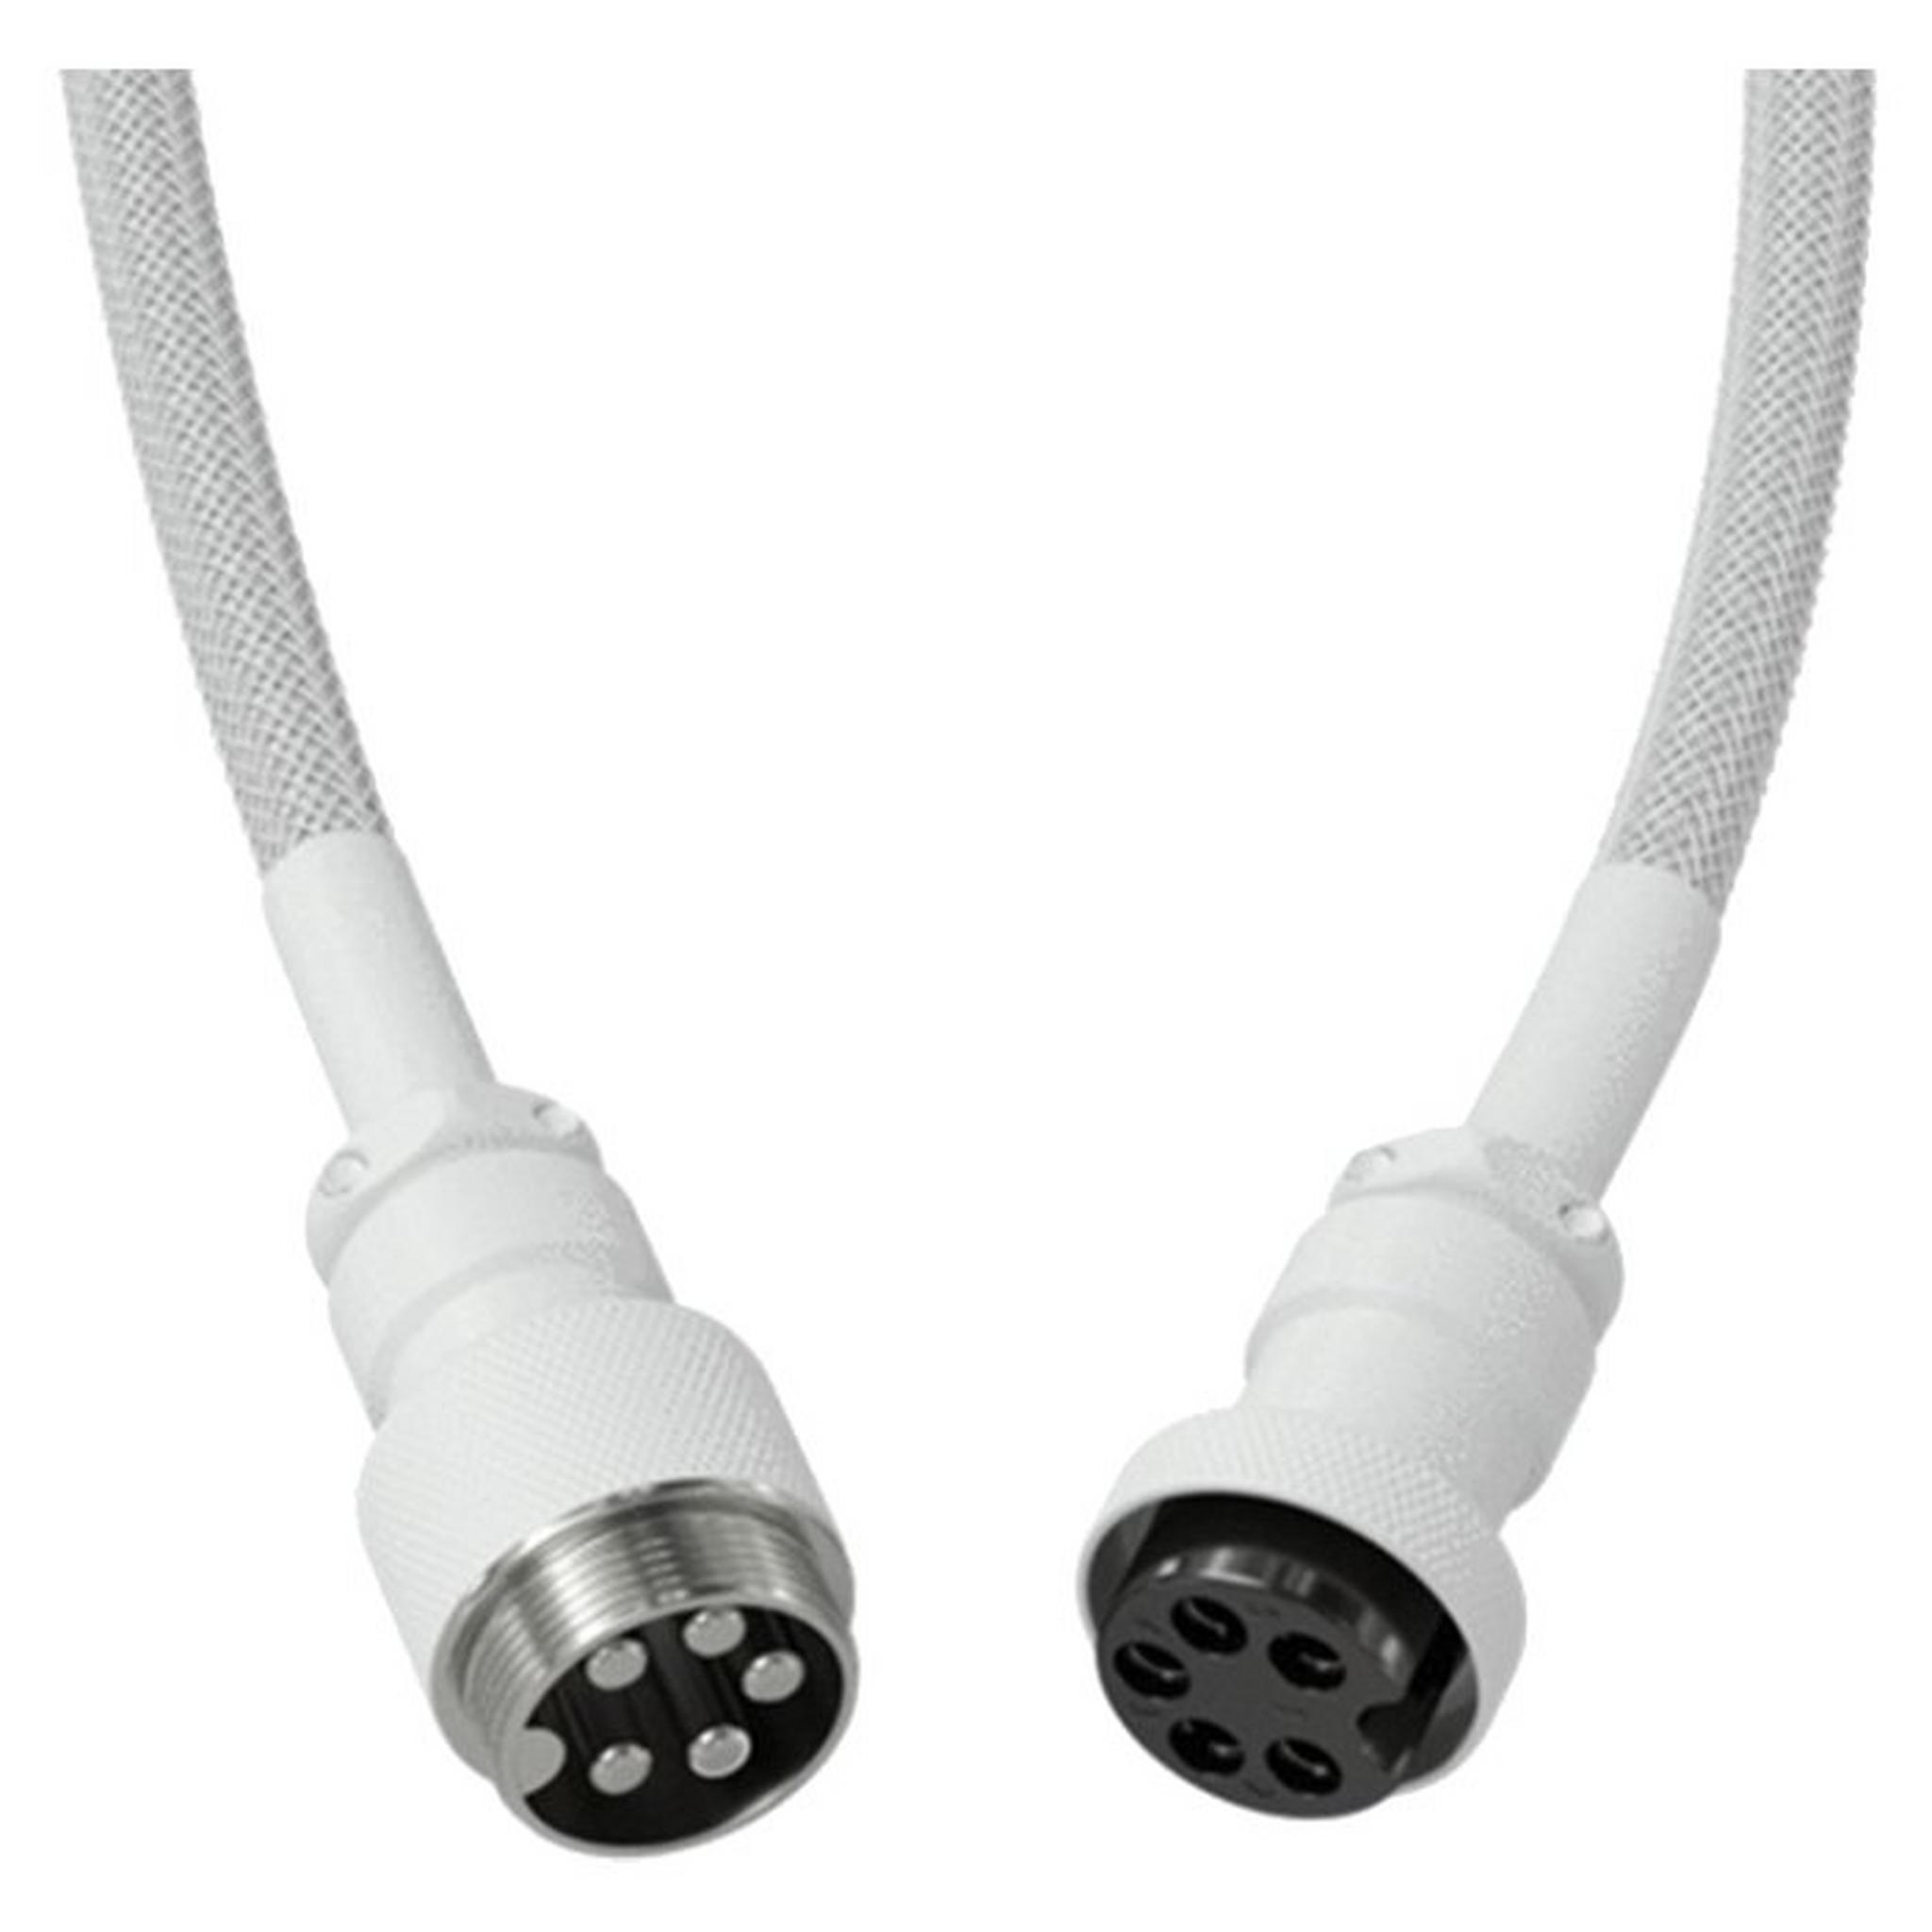 Glorious Coiled 4.5ft Cable for Keyboard - Ghost White